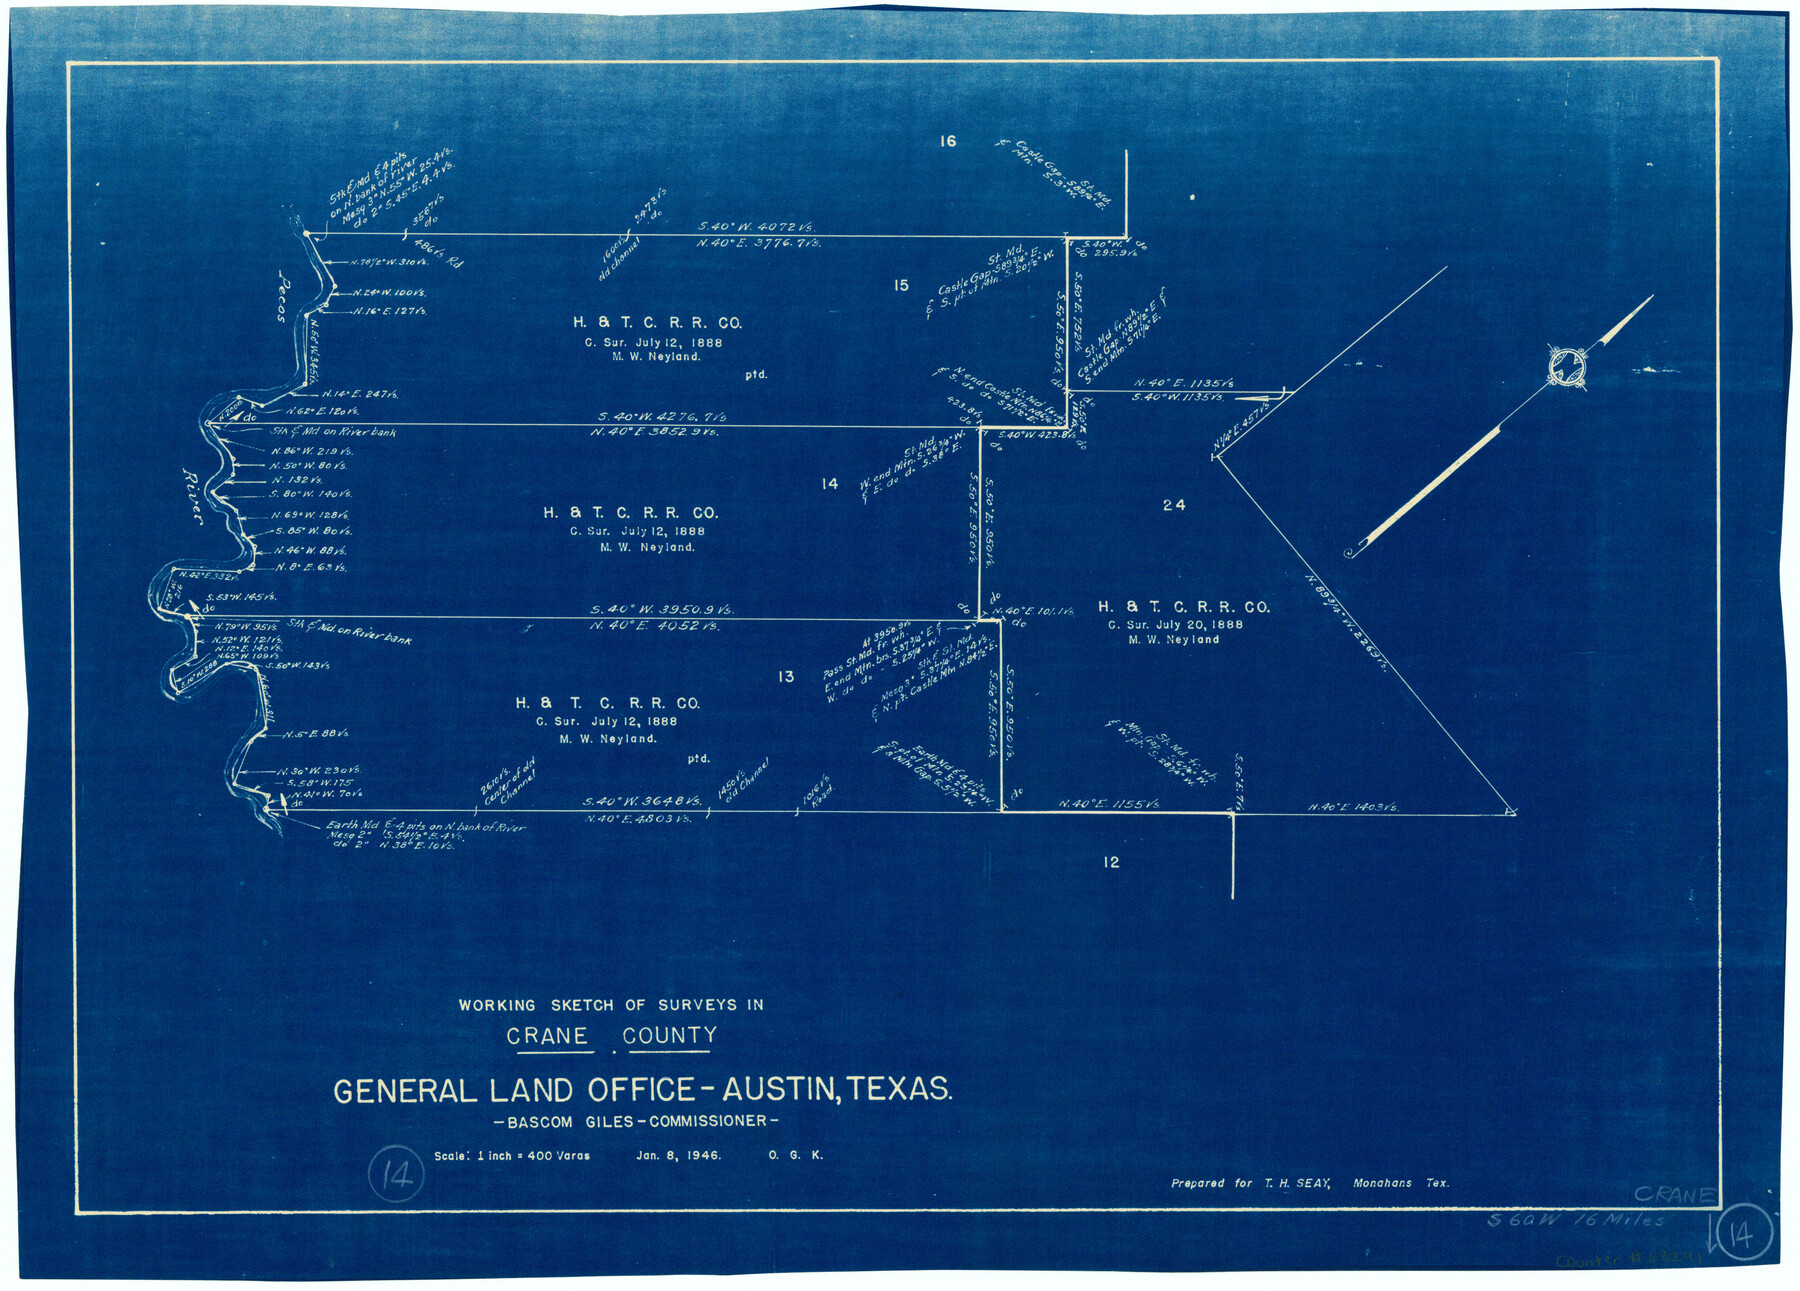 68291, Crane County Working Sketch 14, General Map Collection